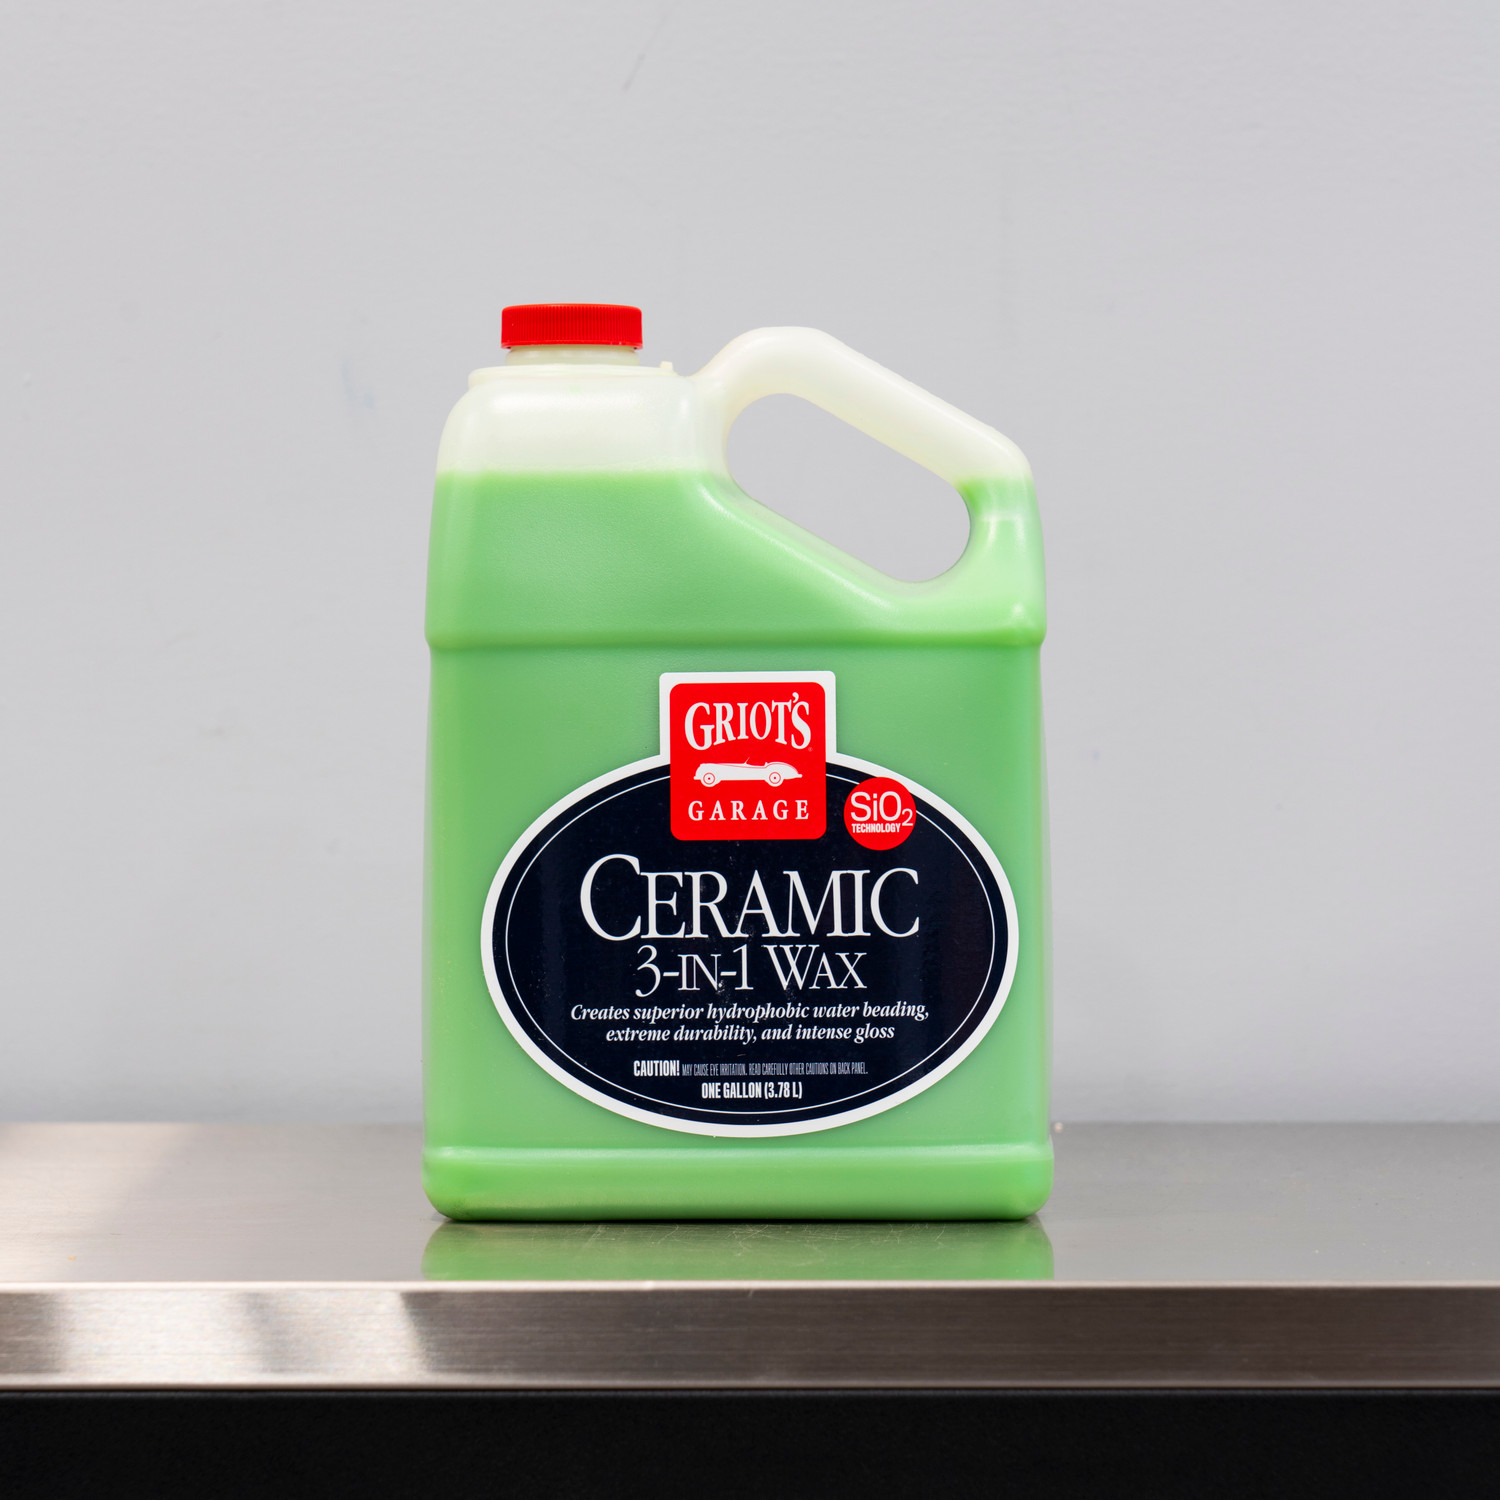 Learn How To Use Ceramic All-in-One Wax - Griots Garage